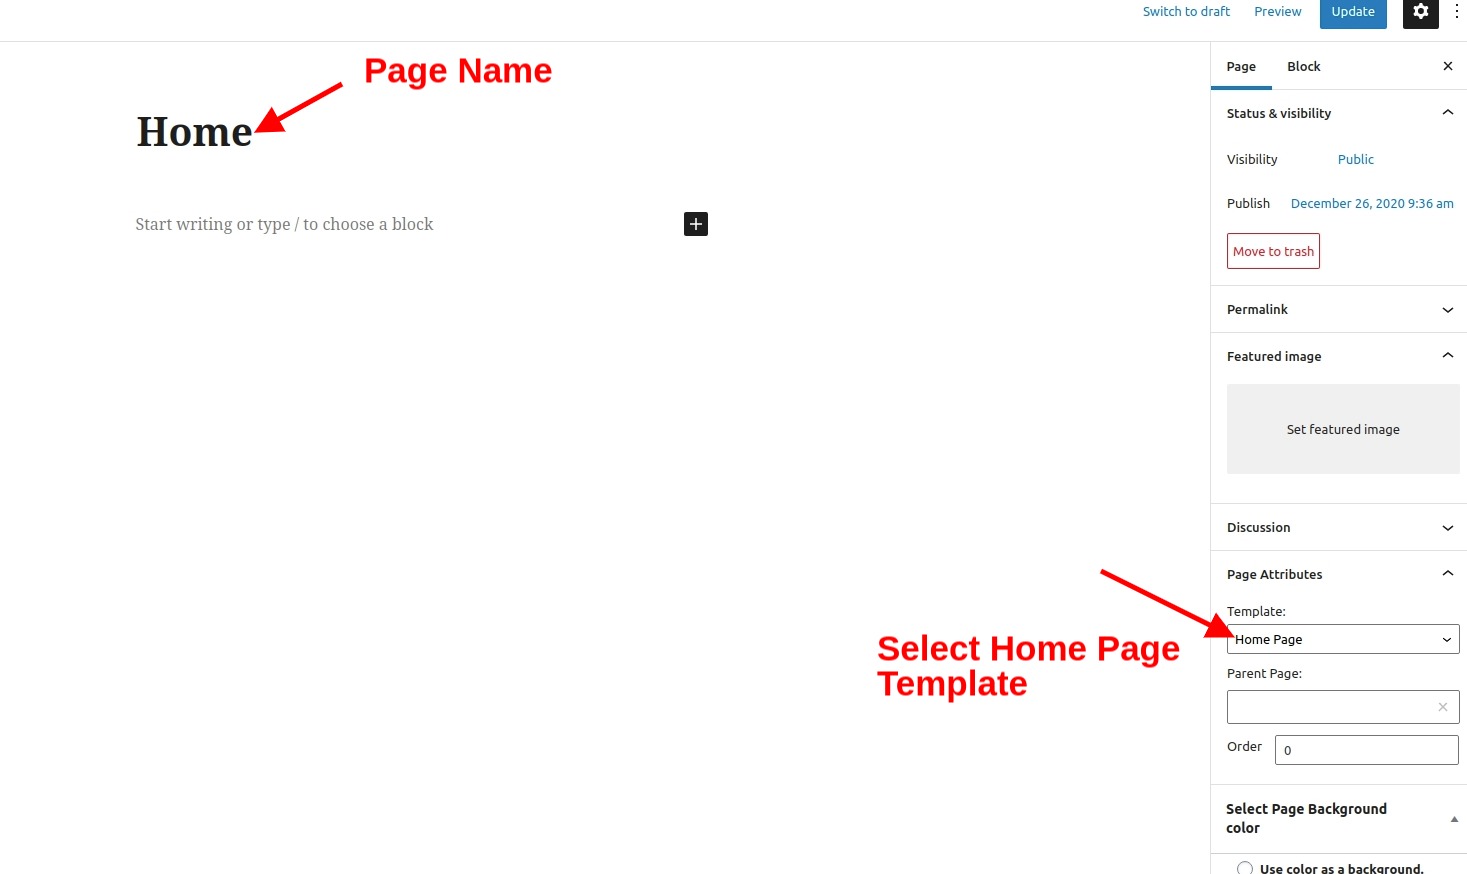 Home Page Setting